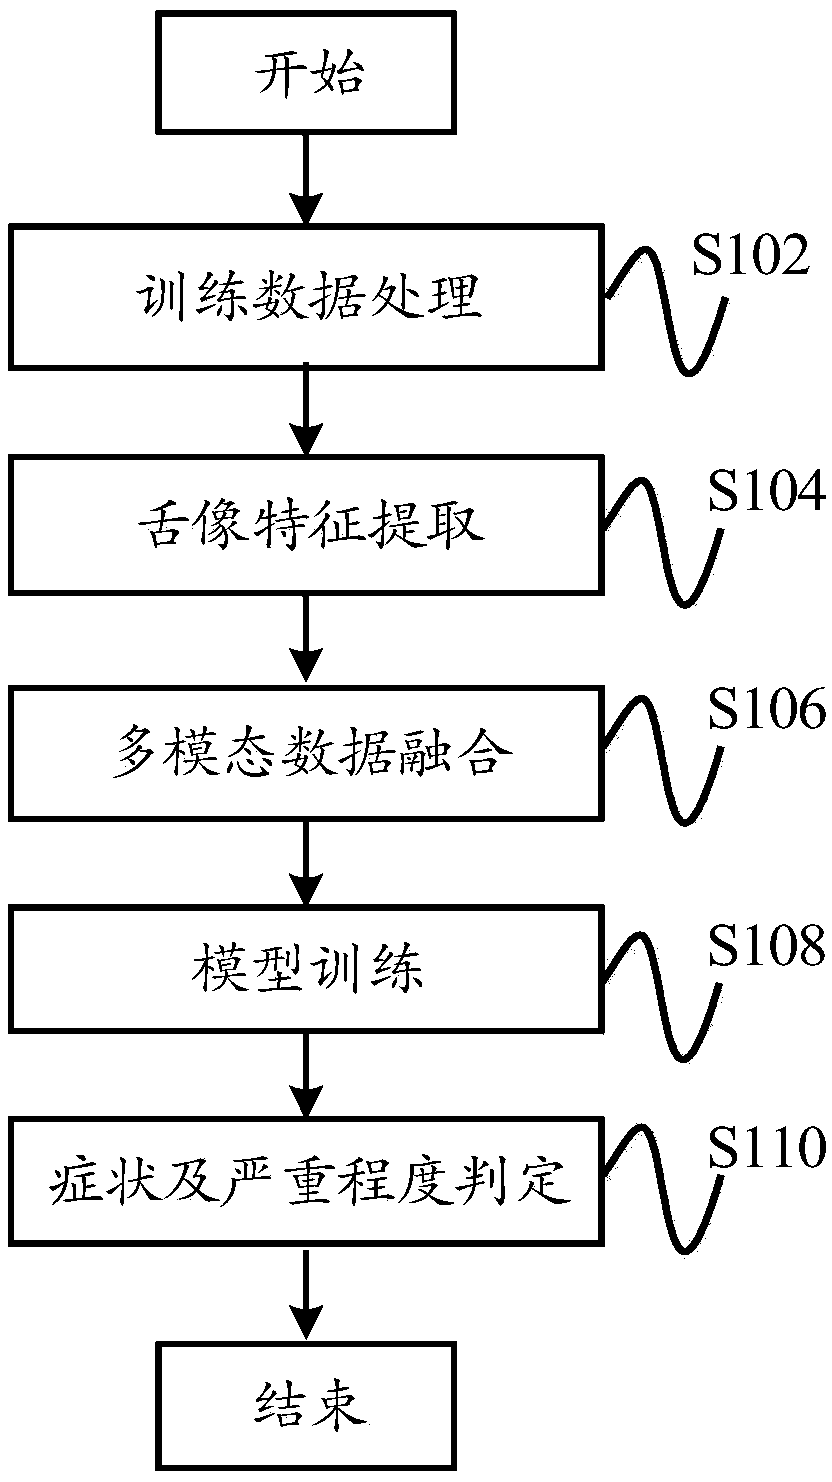 Intelligent processing method for tongue image information of stomach disease in traditional Chinese medicine based on deep learning